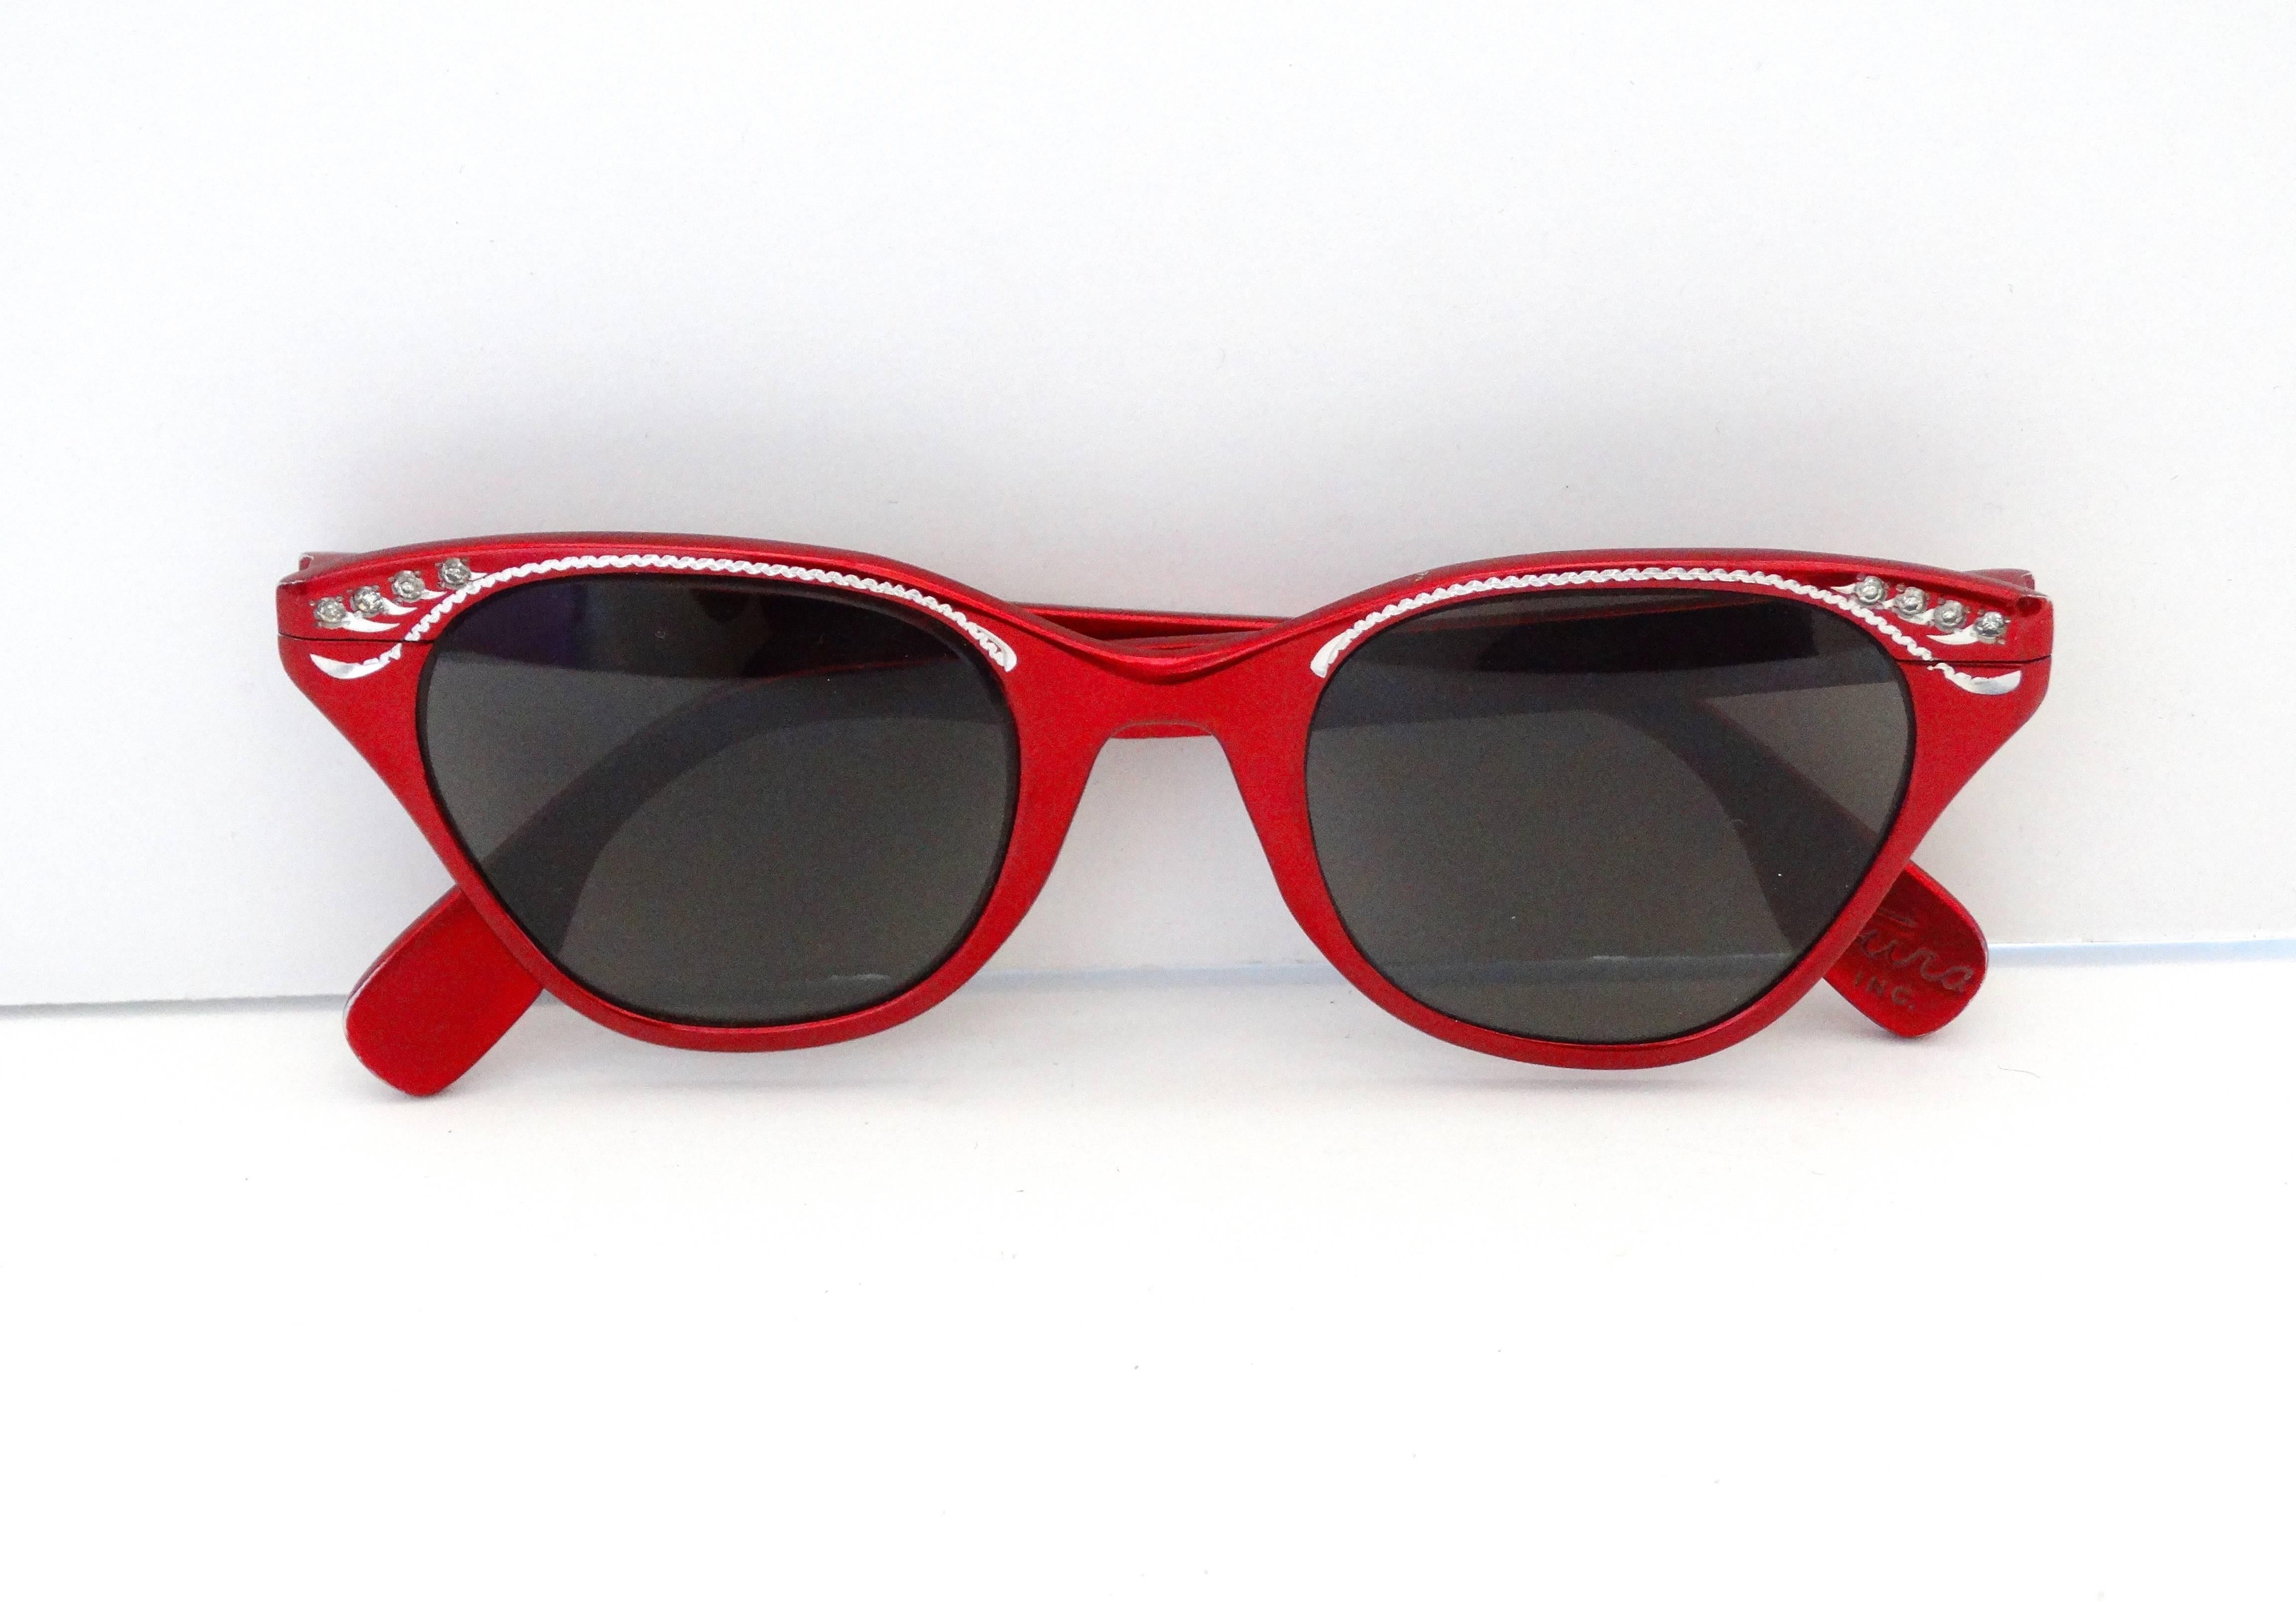 The perfect sunglasses for riding with the top down- head scarf and all! Classic metallic red cat eye sunglasses from iconic vintage eyewear designer, Tura. Accented with silver details and rhinestones around the top rims. Dark grey tinted lenses.